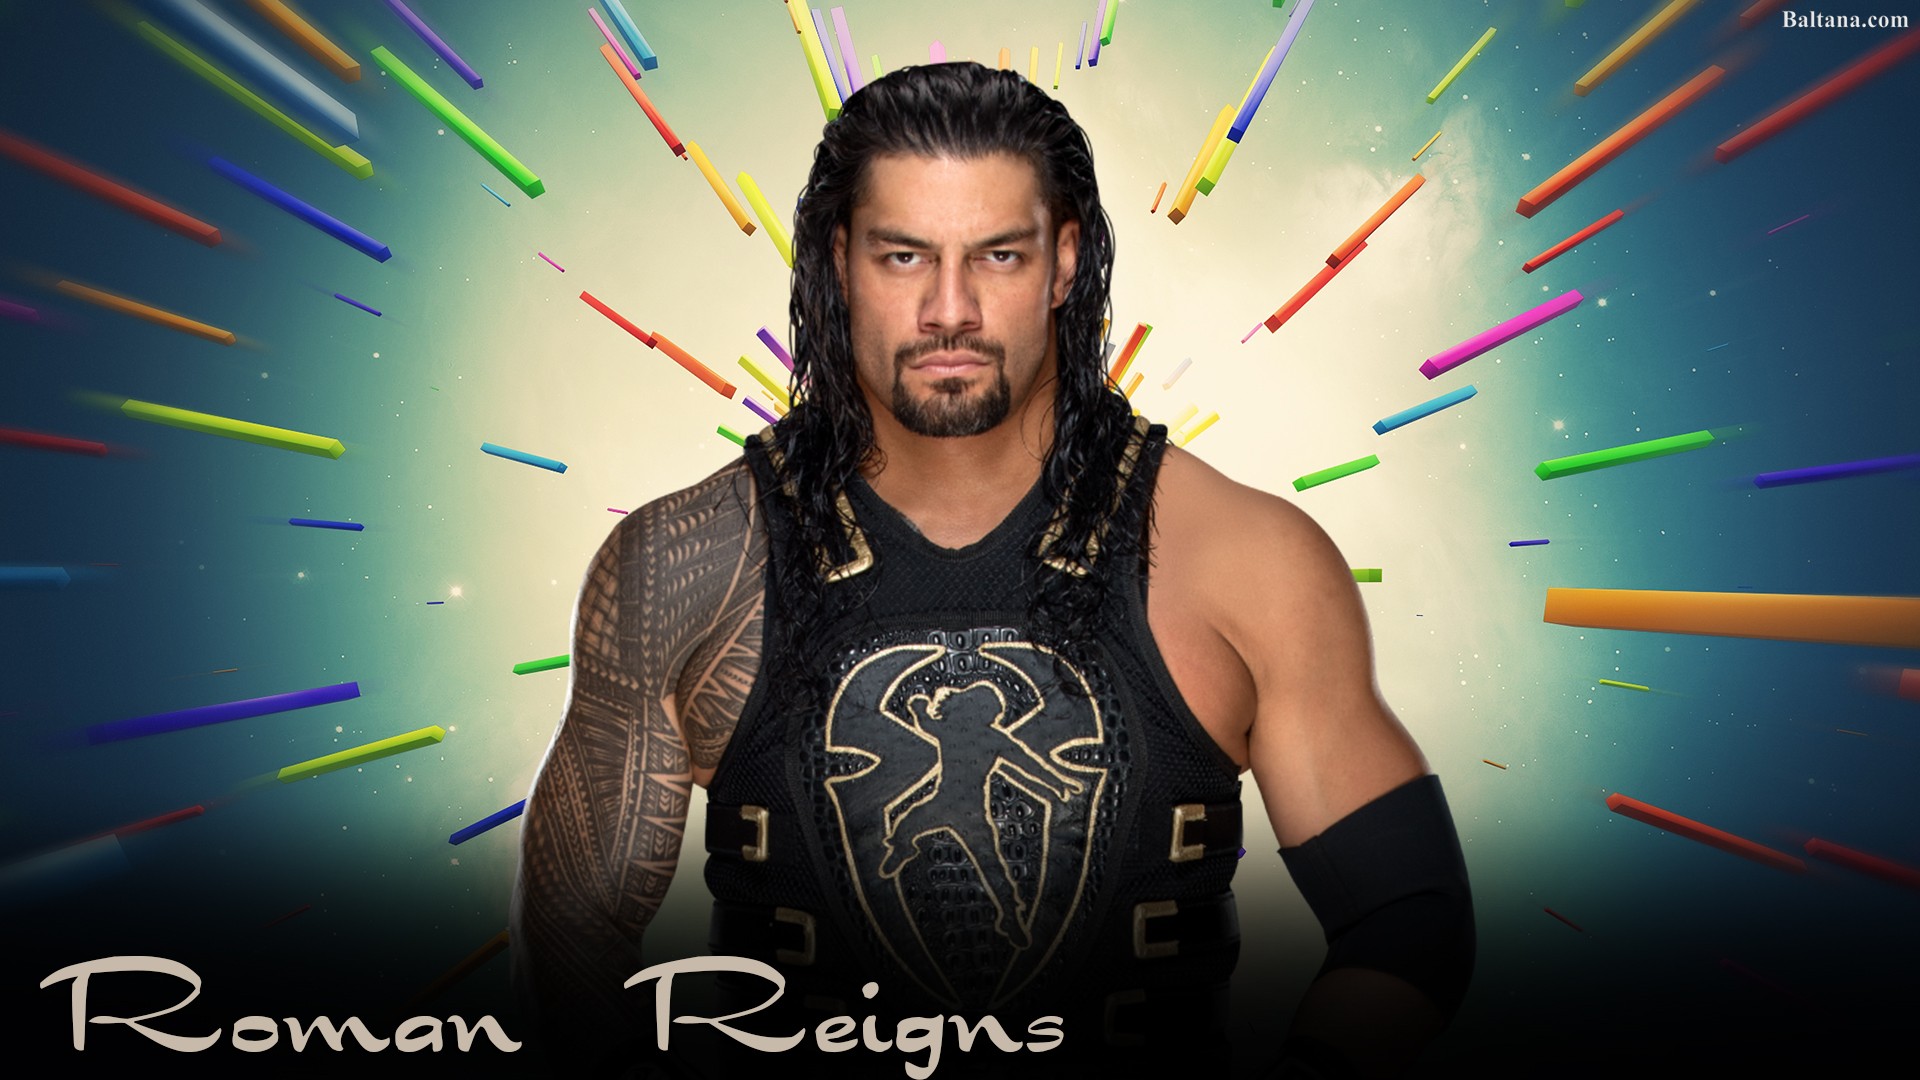 Download free Roman Reigns 2018 Wallpaper 33984 available in different high...